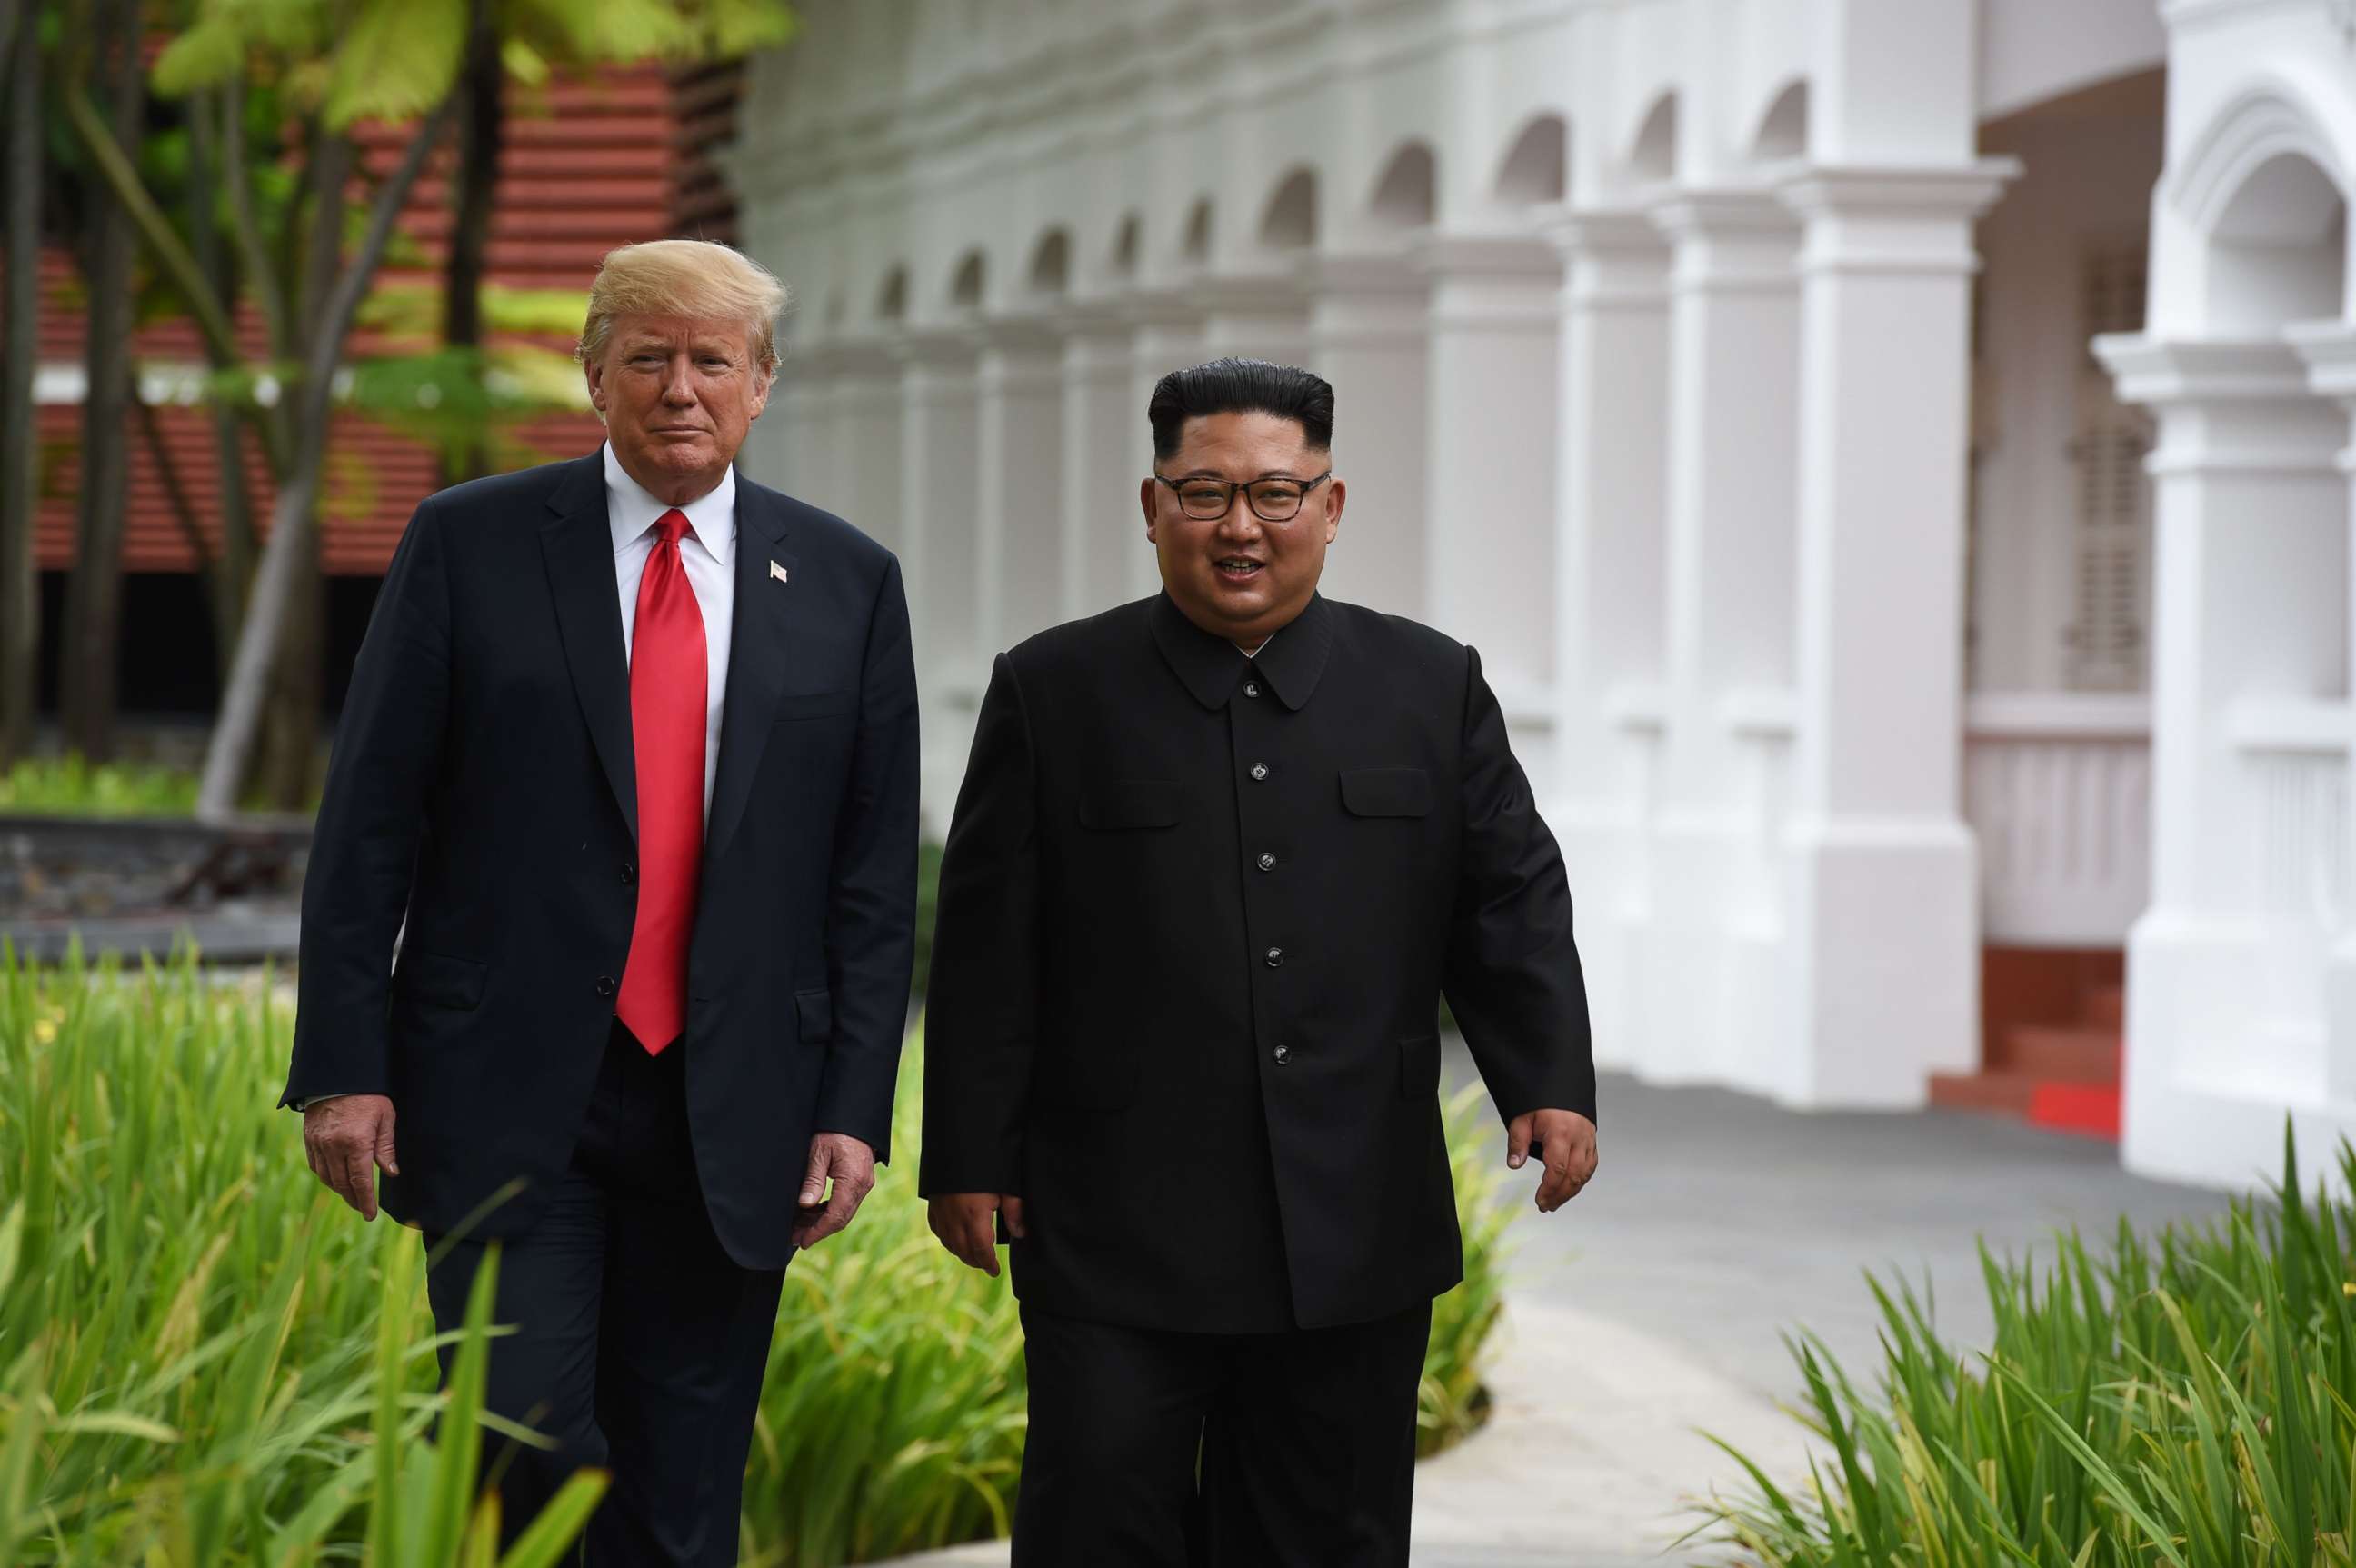 PHOTO: President Donald Trump walks with North Korea's leader Kim Jong Un during a break in talks at their summit, at the Capella Hotel on Sentosa island in Singapore on June 12, 2018.